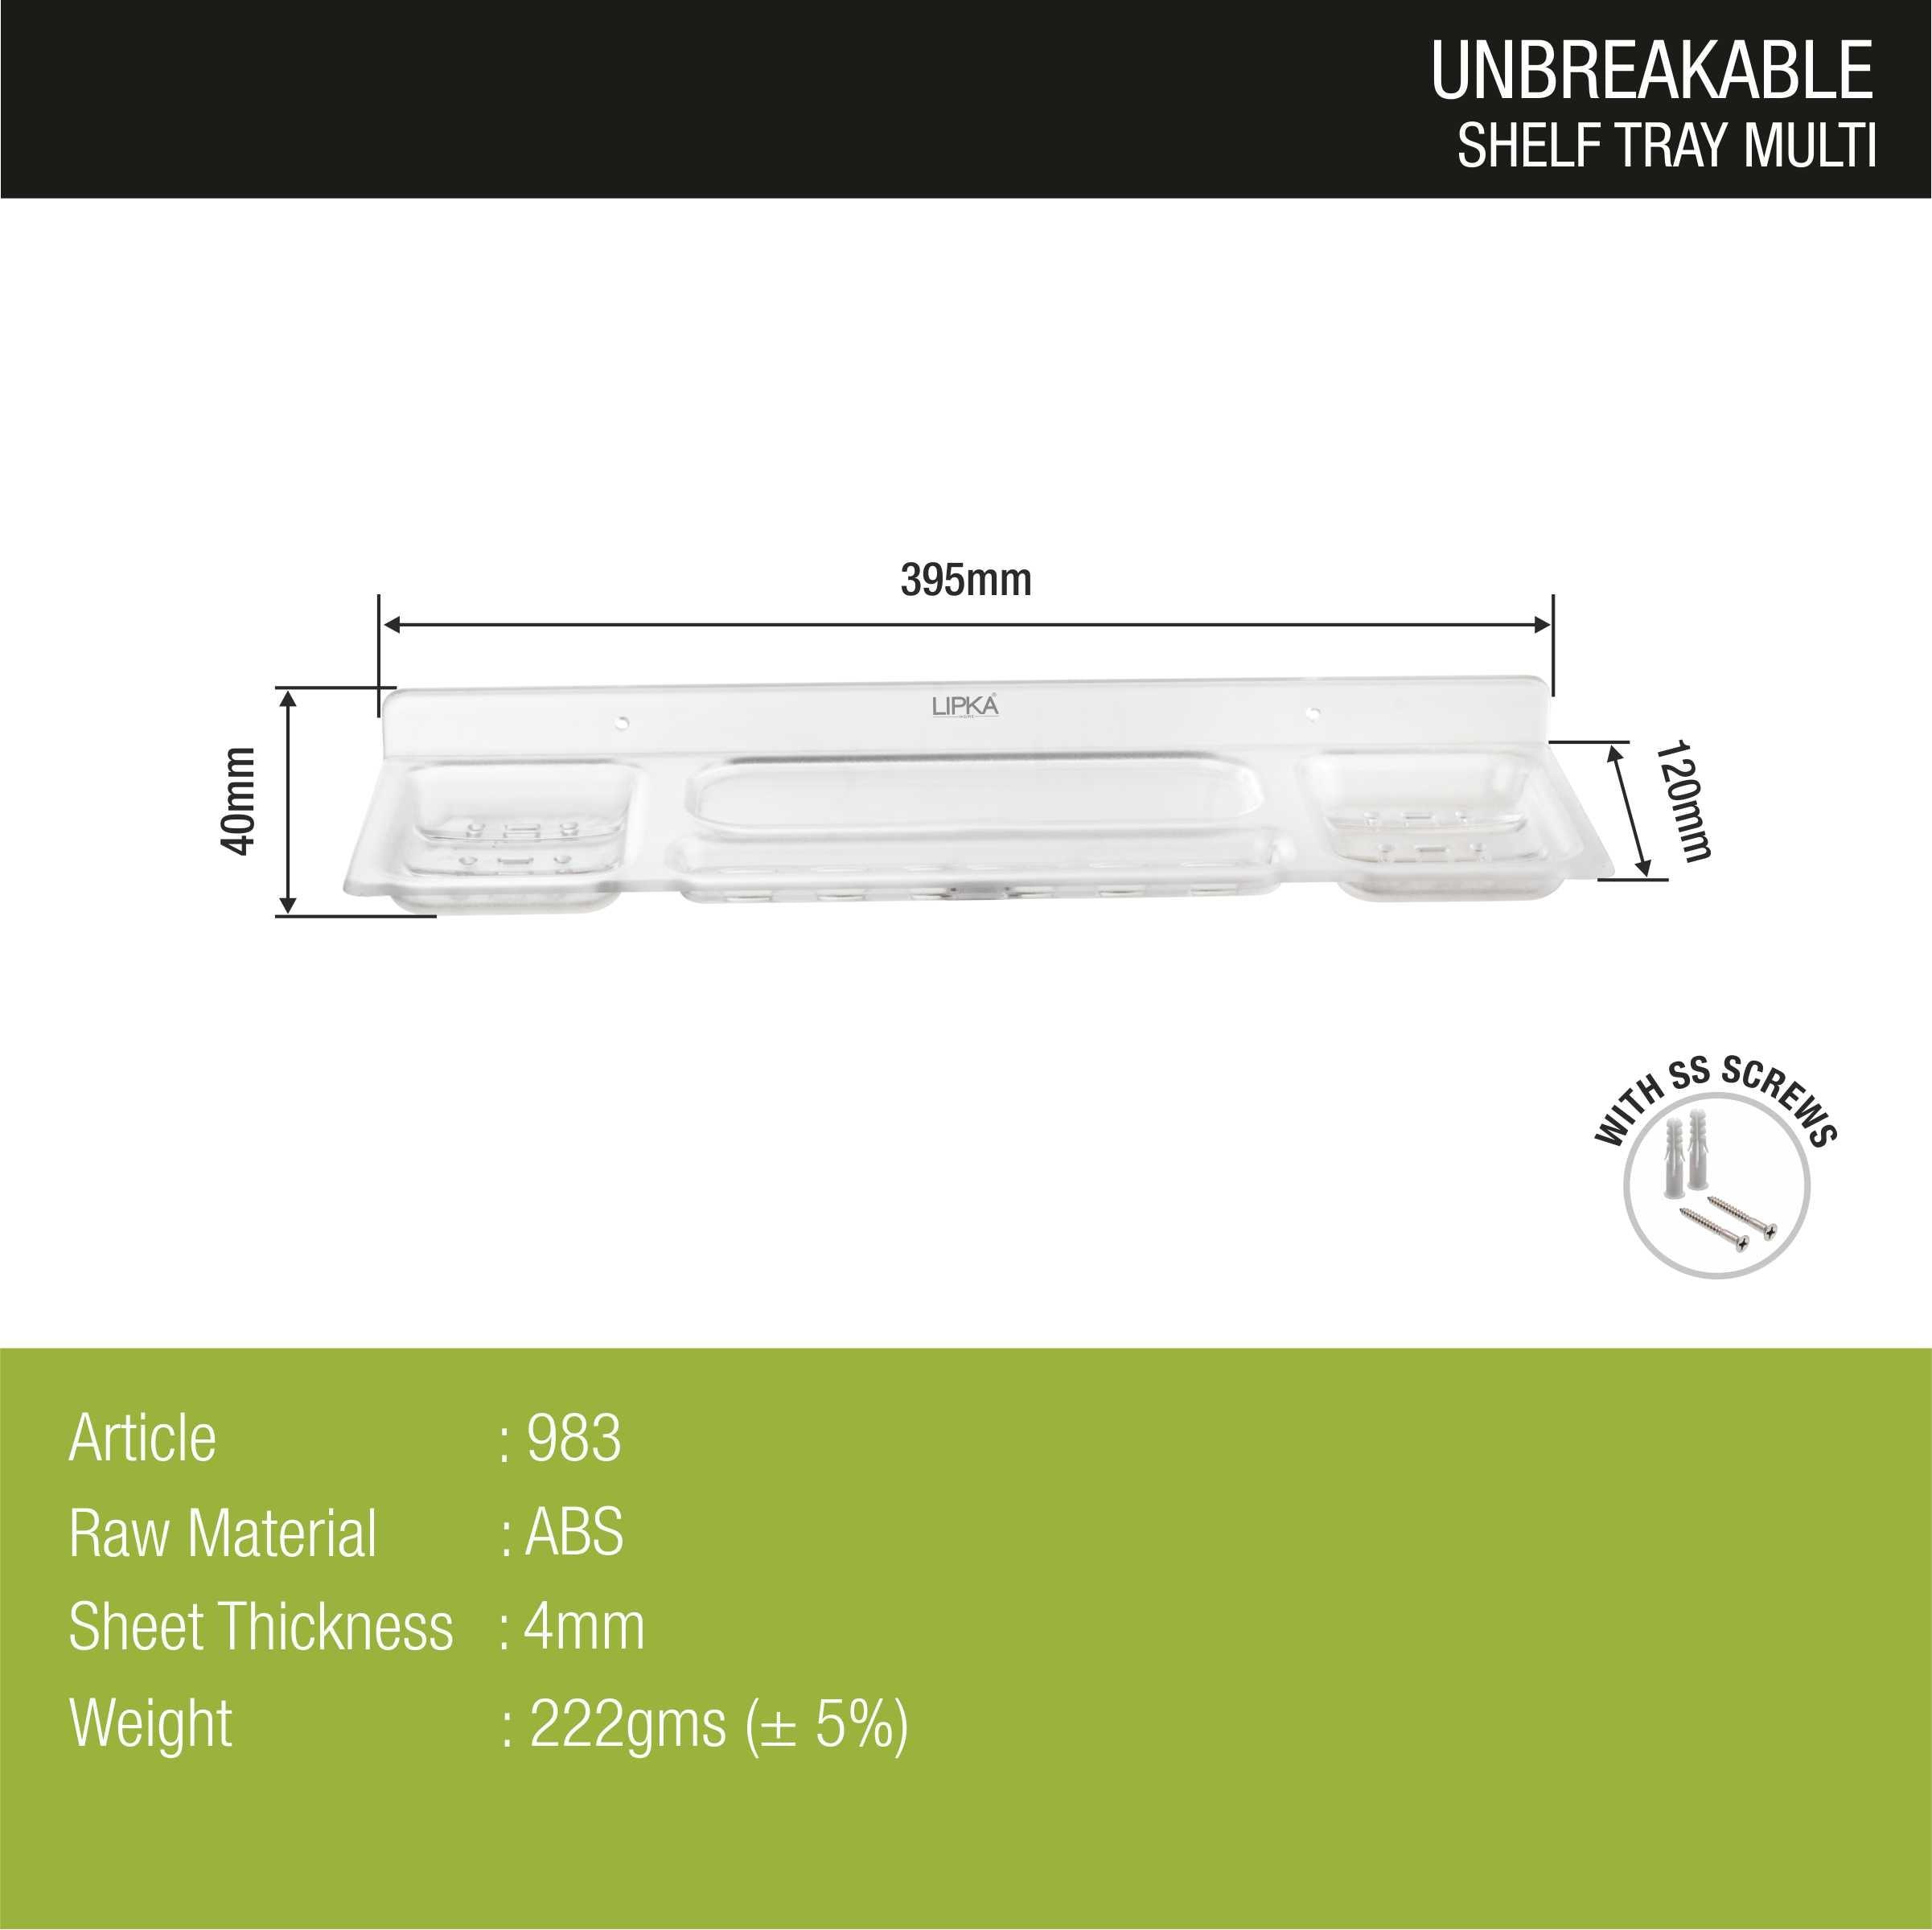 Multi ABS Shelf Tray dimensions and sizes